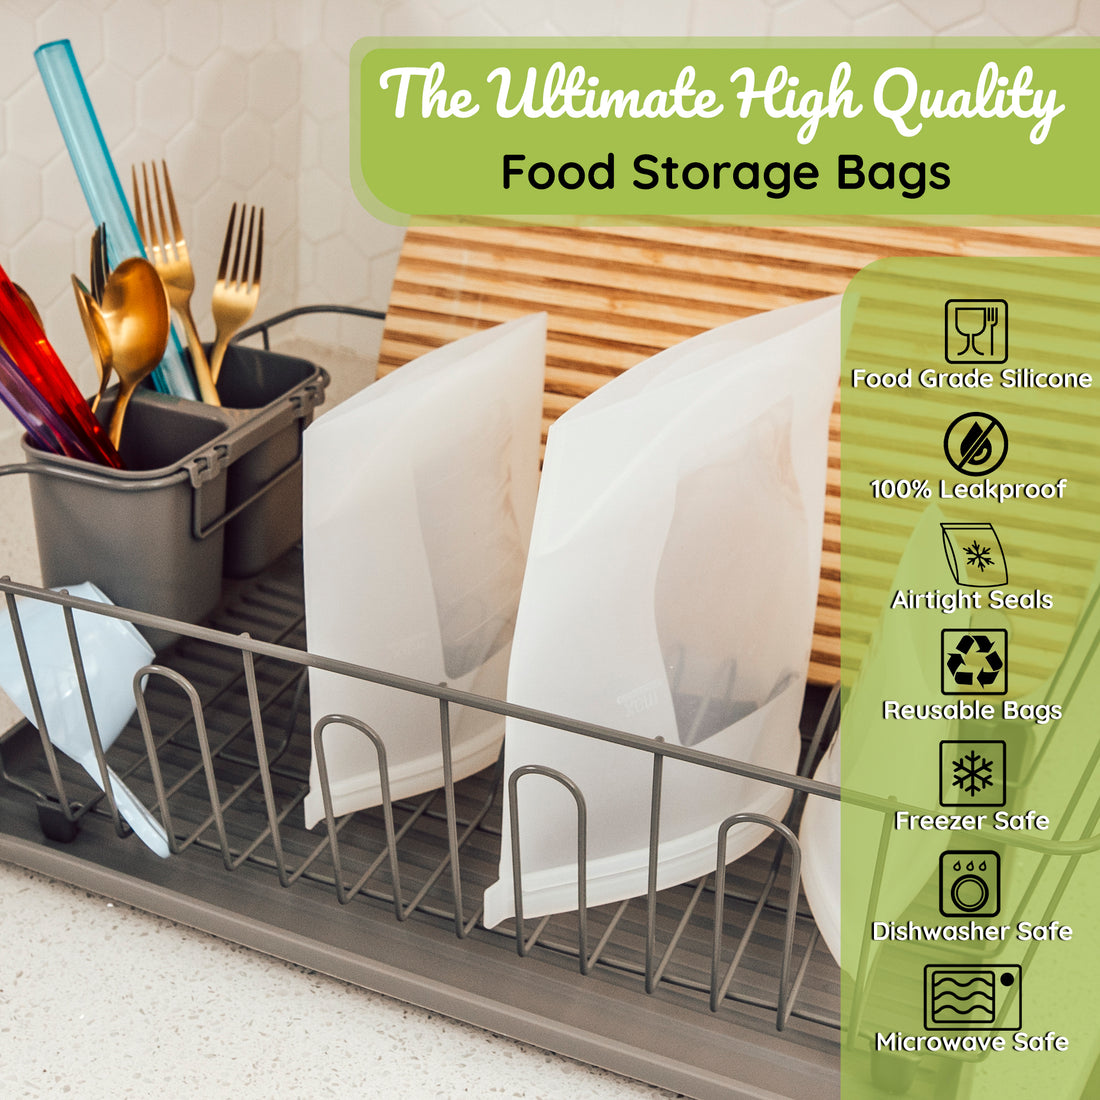 Reusable Silicone Food Storage Bags,stand Up Leakproof Zip Containers,reusable  Sandwich Bags,non-toxic,bpa Free, Dishwasher Safe,freezer-safe,easy To